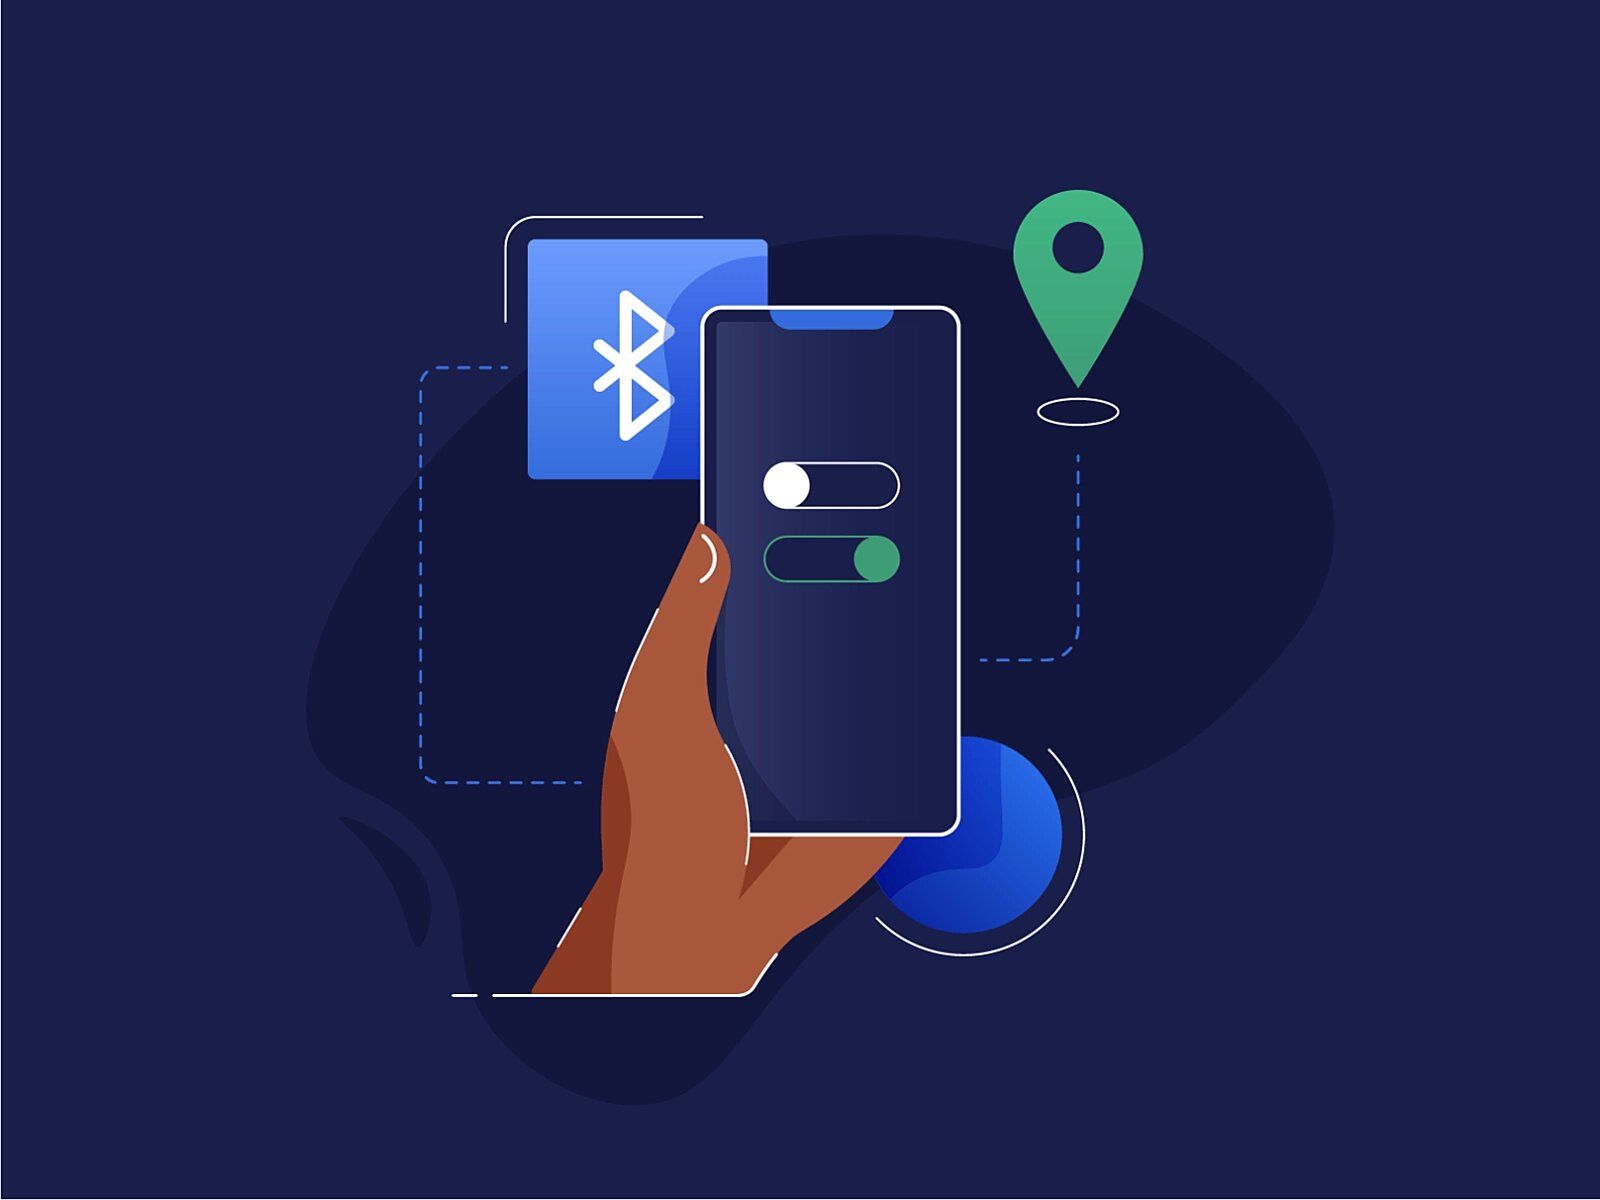 Bluetooth of any type plays a crucial role in developing and connecting IoT applications (*image by [Josh Warren](https://dribbble.com/joshwarren){ rel="nofollow" target="_blank" .default-md}*)